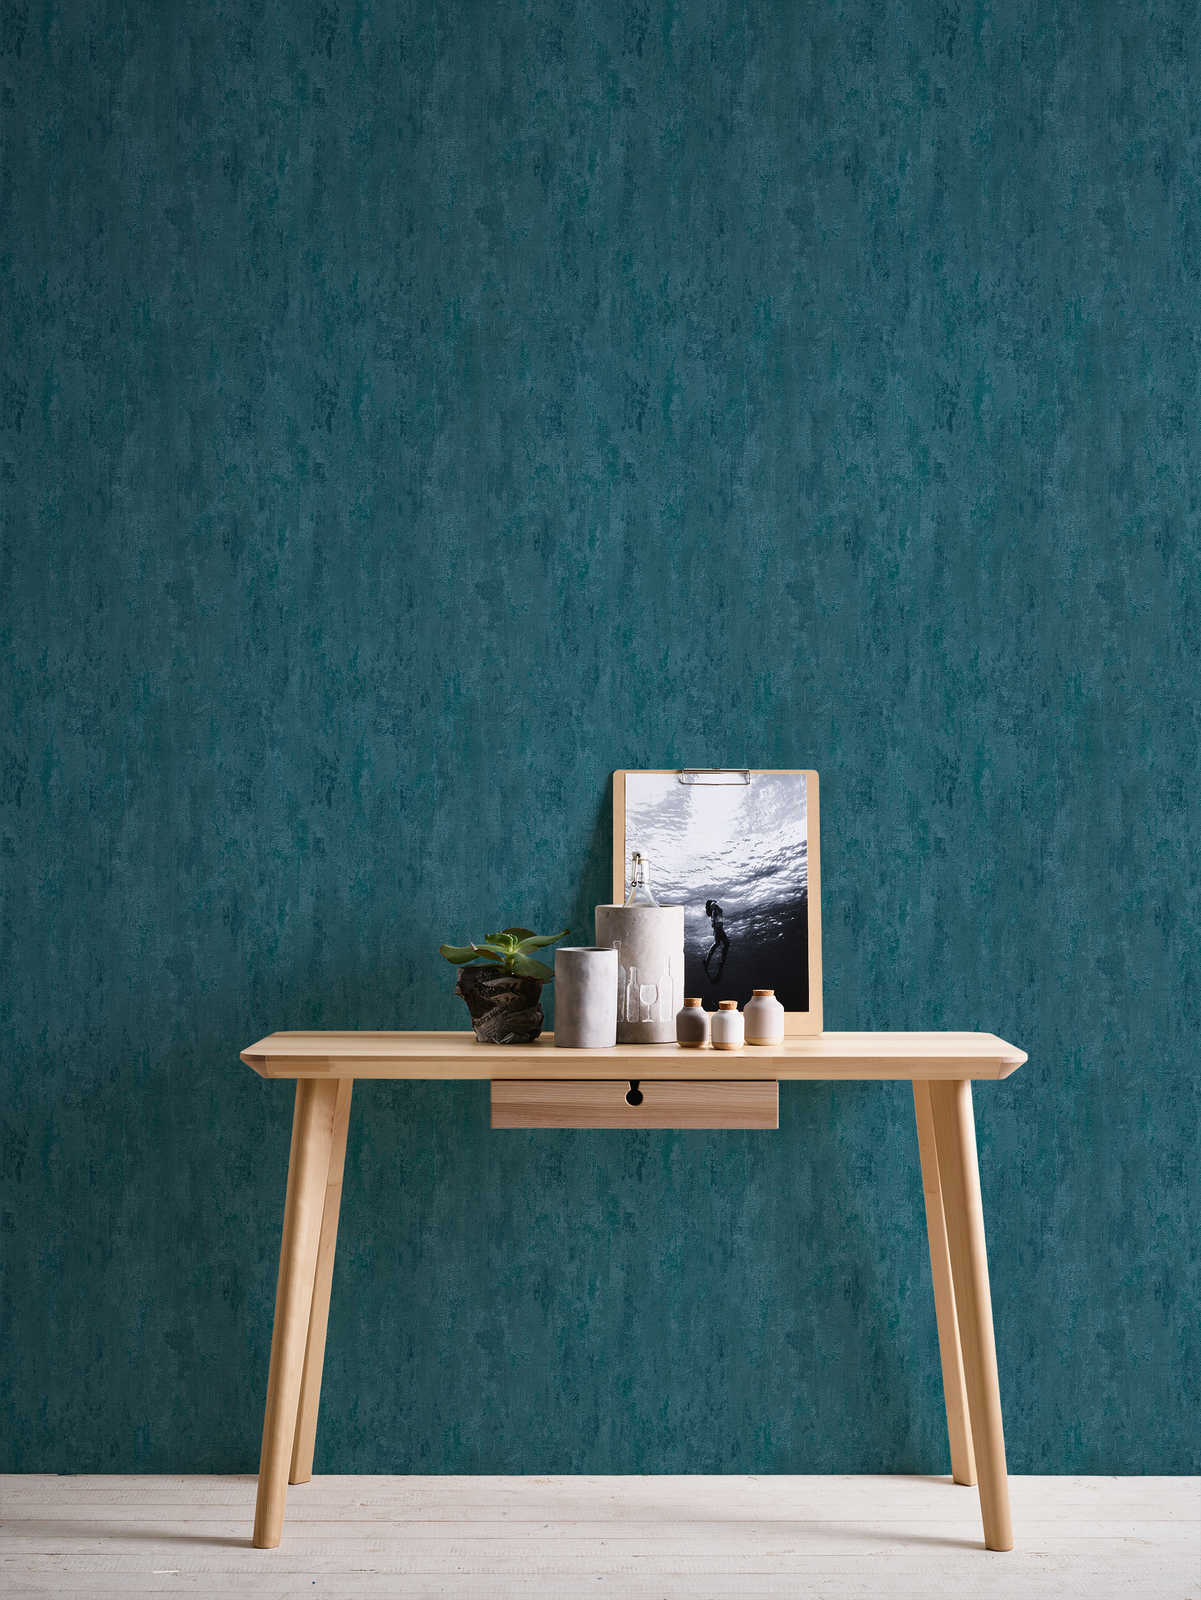             Wallpaper industrial style with texture effect - blue, metallic
        